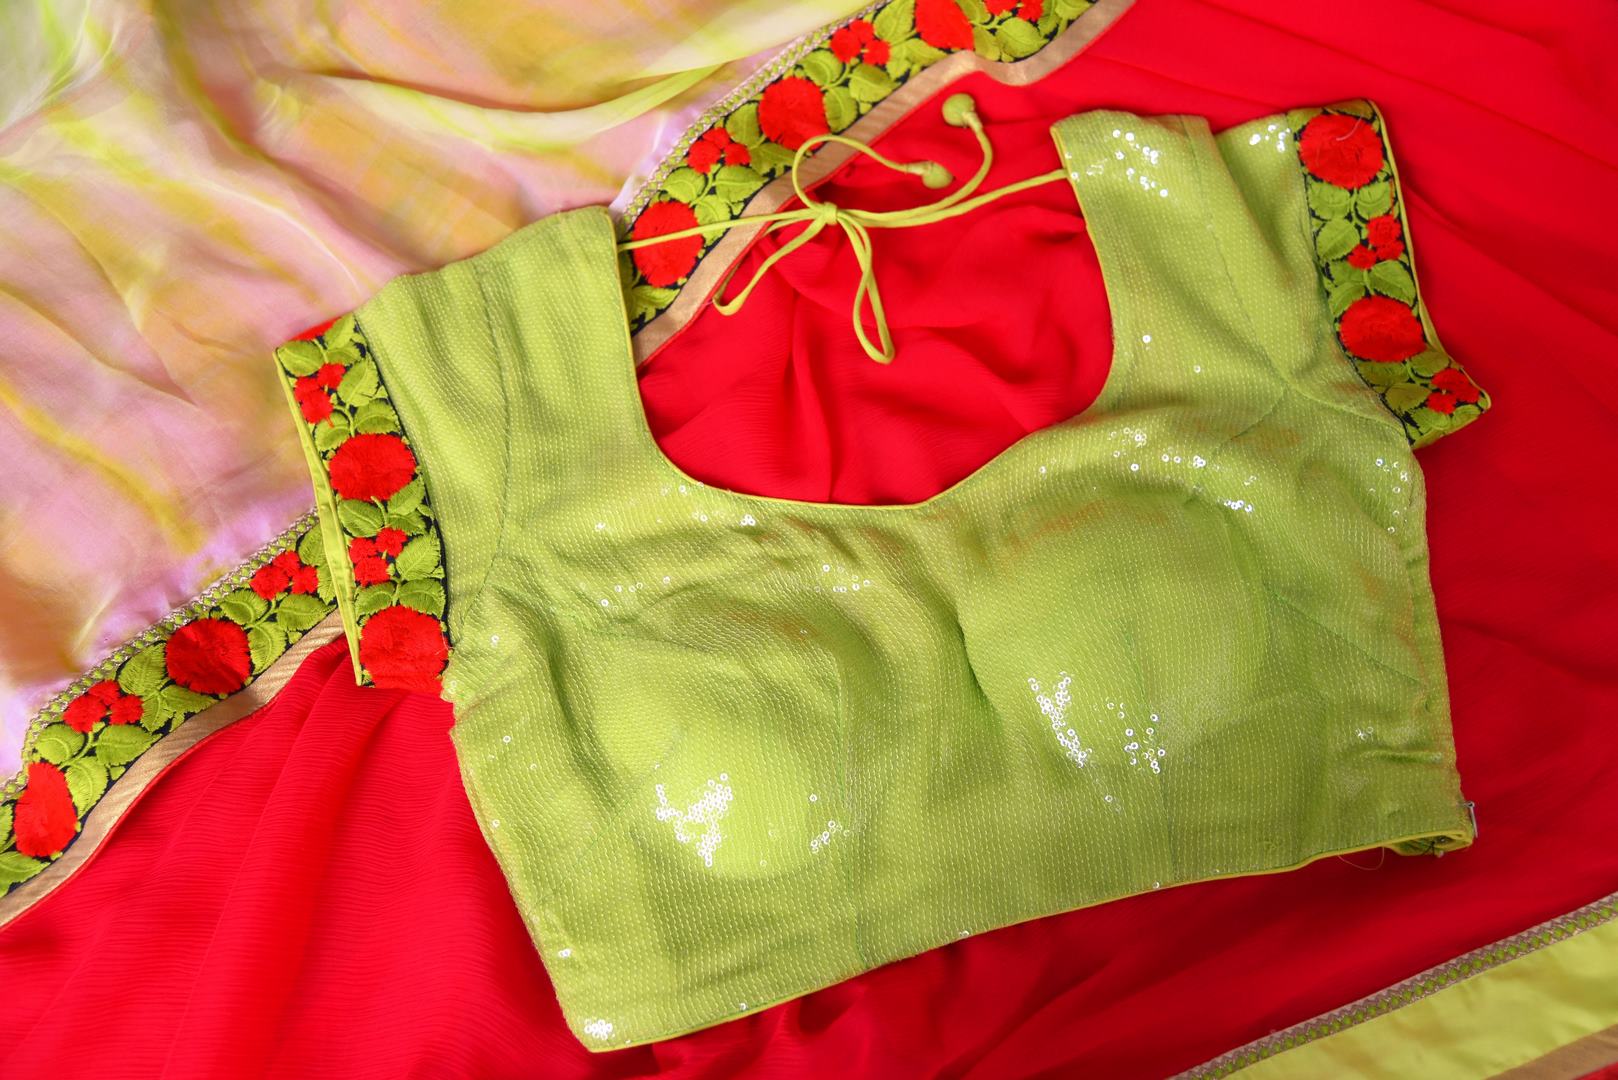 Buy red chiffon saree online in USA with neon green saree blouse. Shop the latest designer saris for weddings and special occasions from Pure Elegance Indian clothing store in USA.-details